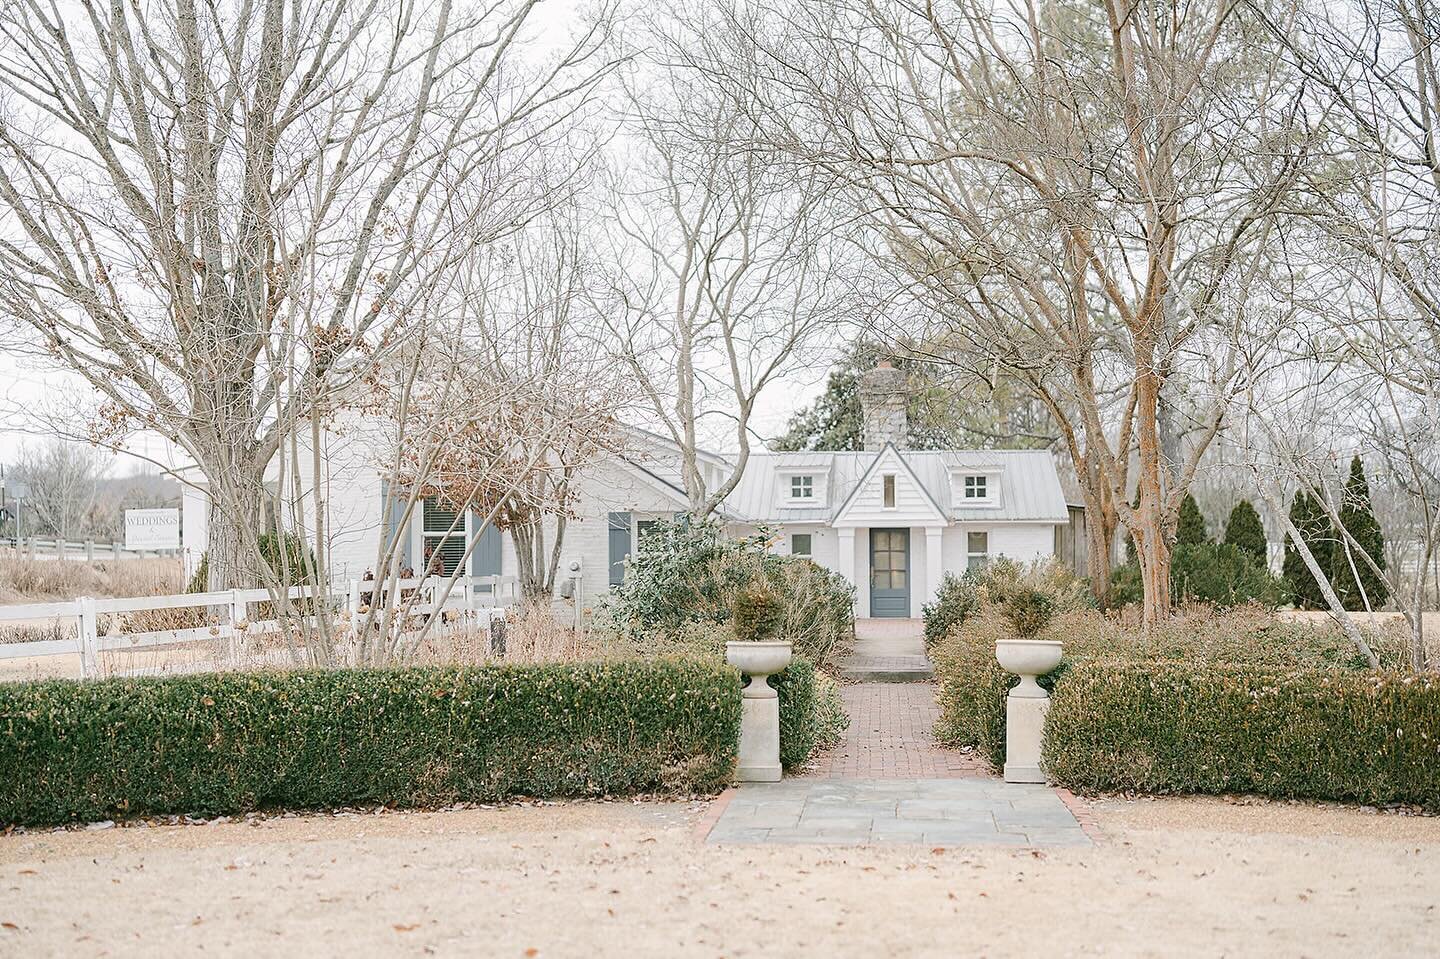 Soon our property will be as green and lush outside as it is inside.  Until then we&rsquo;ll cherish the simple beauty of winter in Tennessee. #winterlandscape